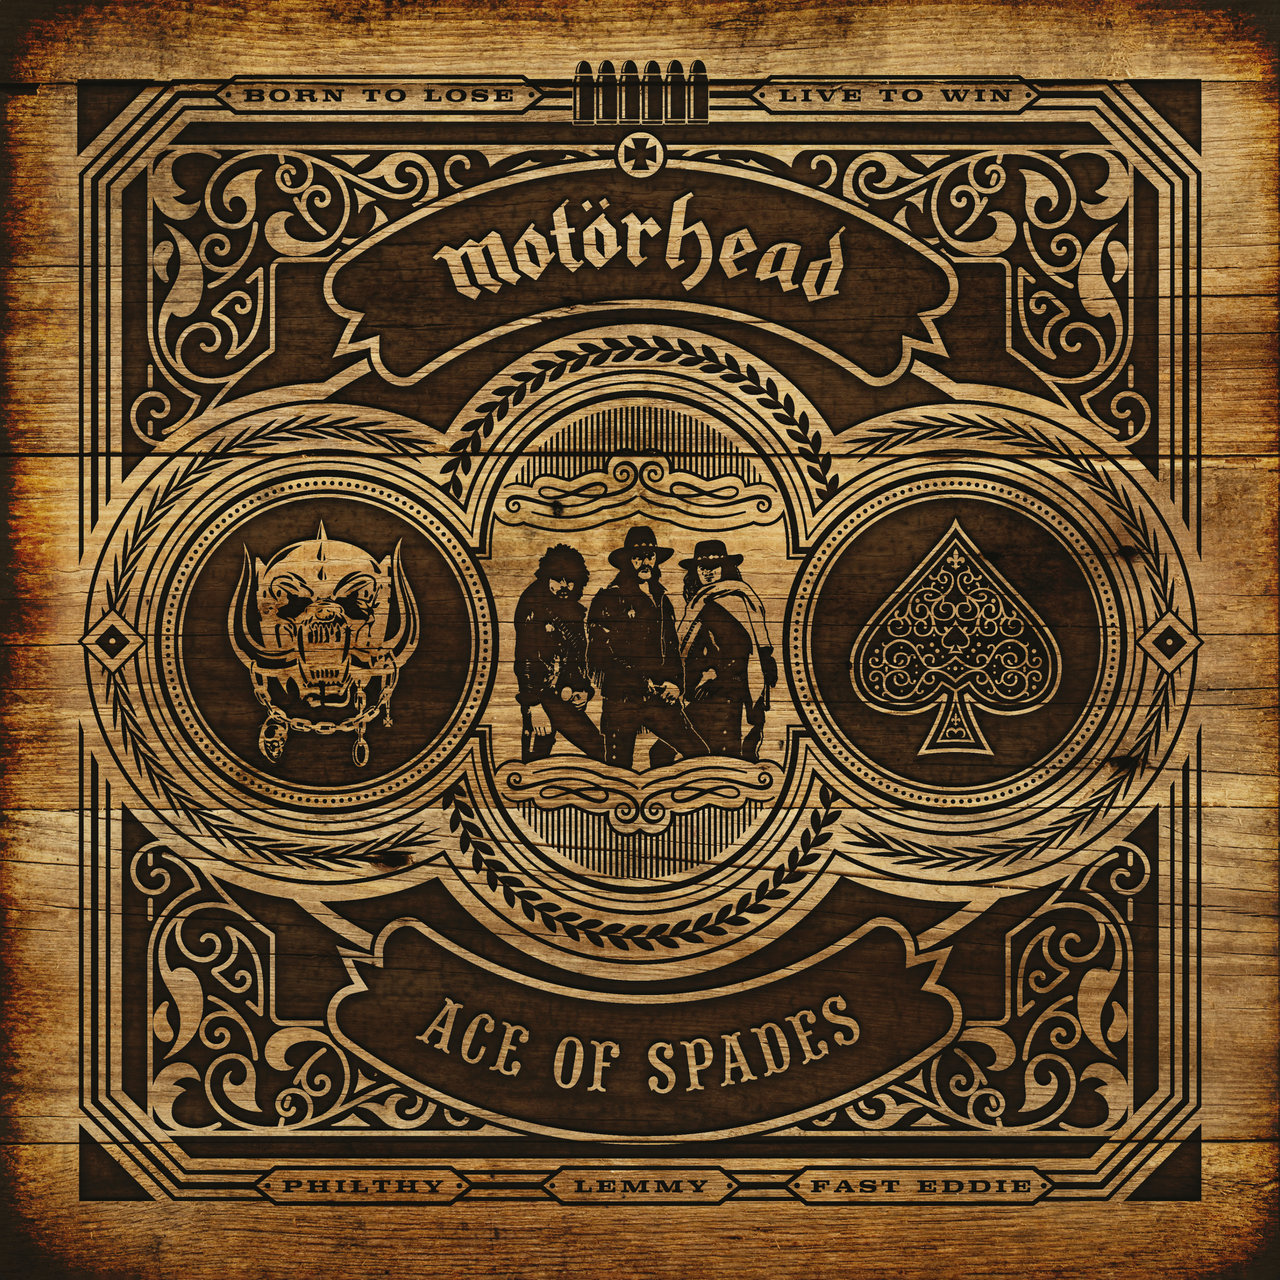 Motorhead - Ace of Spades (40th Anniversary Deluxe Edition) (2020) [FLAC 24bit/44,1kHz]